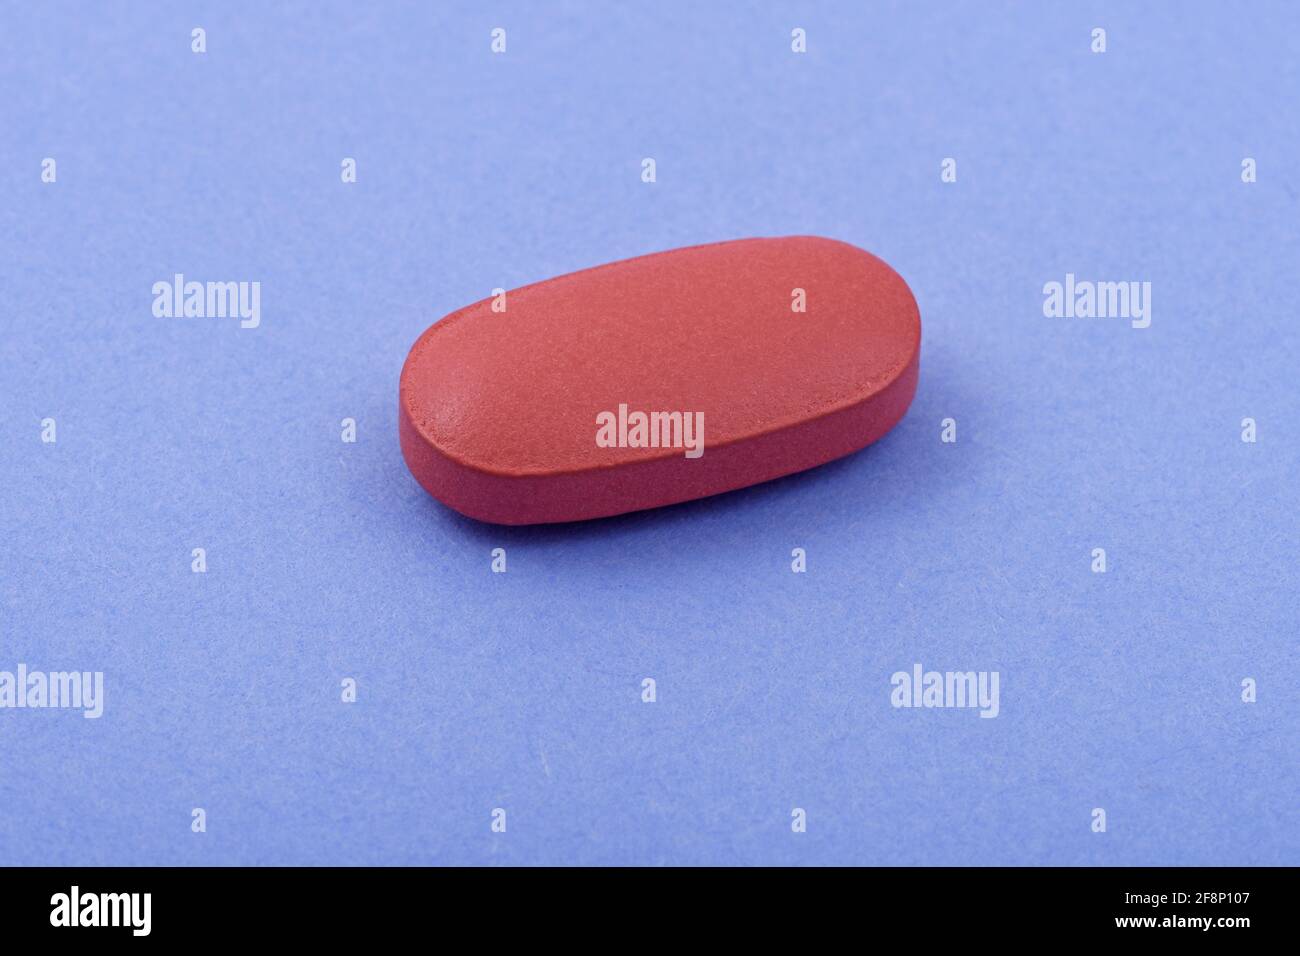 Oval shape Pharmaceutical medicine tablet on blue background, Flat lay Copy space Medicine concepts Light blue color background Stock Photo